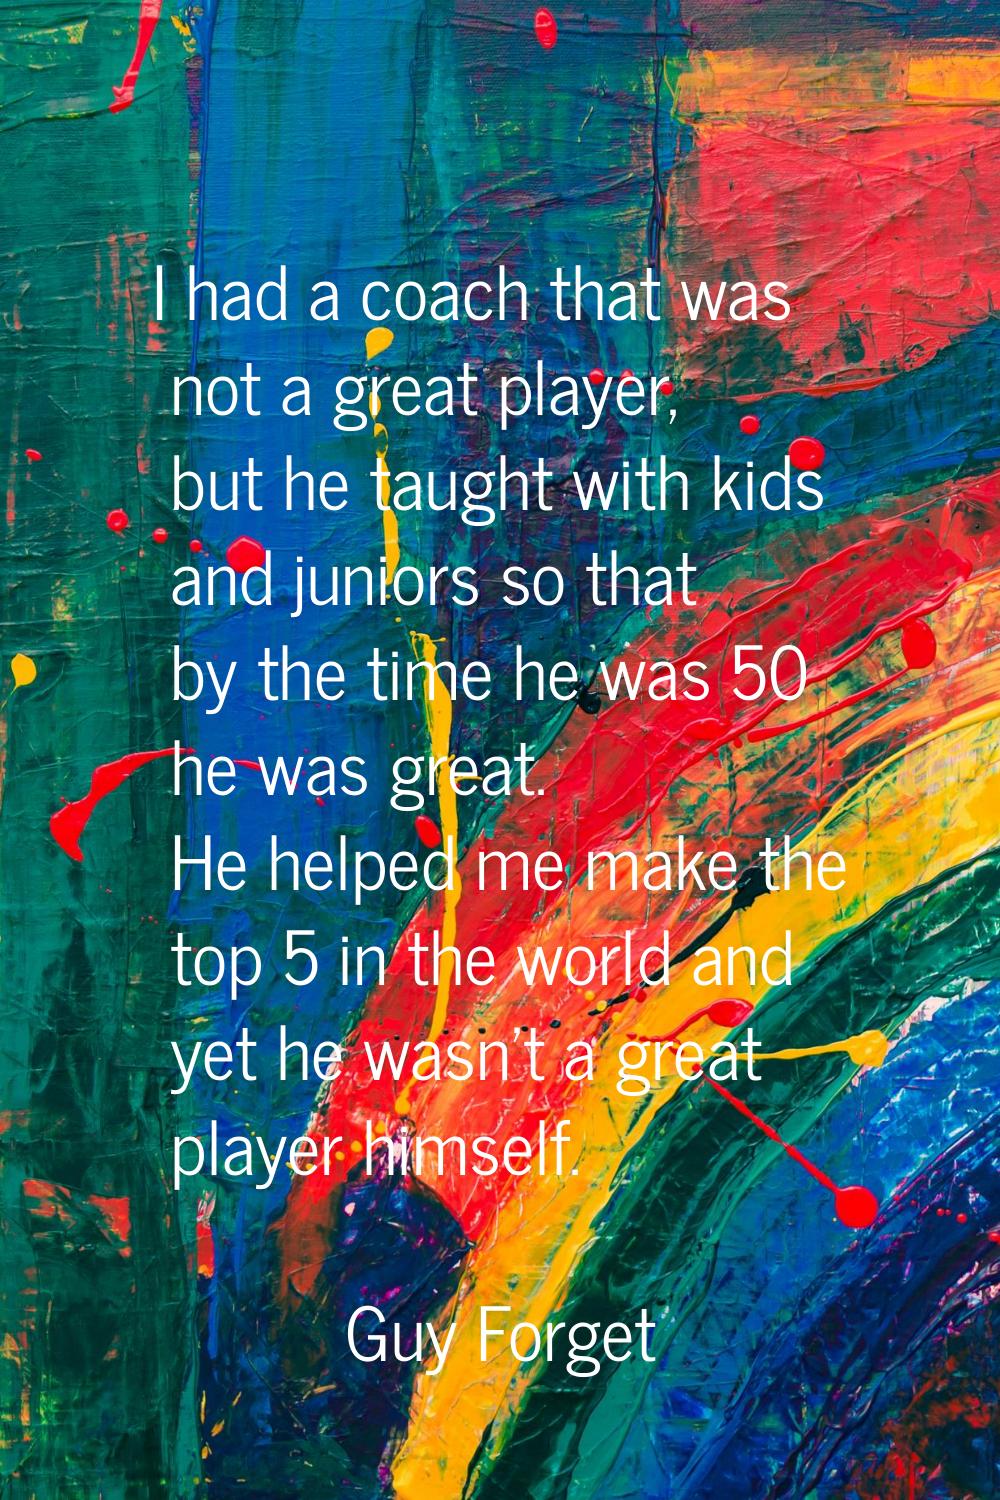 I had a coach that was not a great player, but he taught with kids and juniors so that by the time 